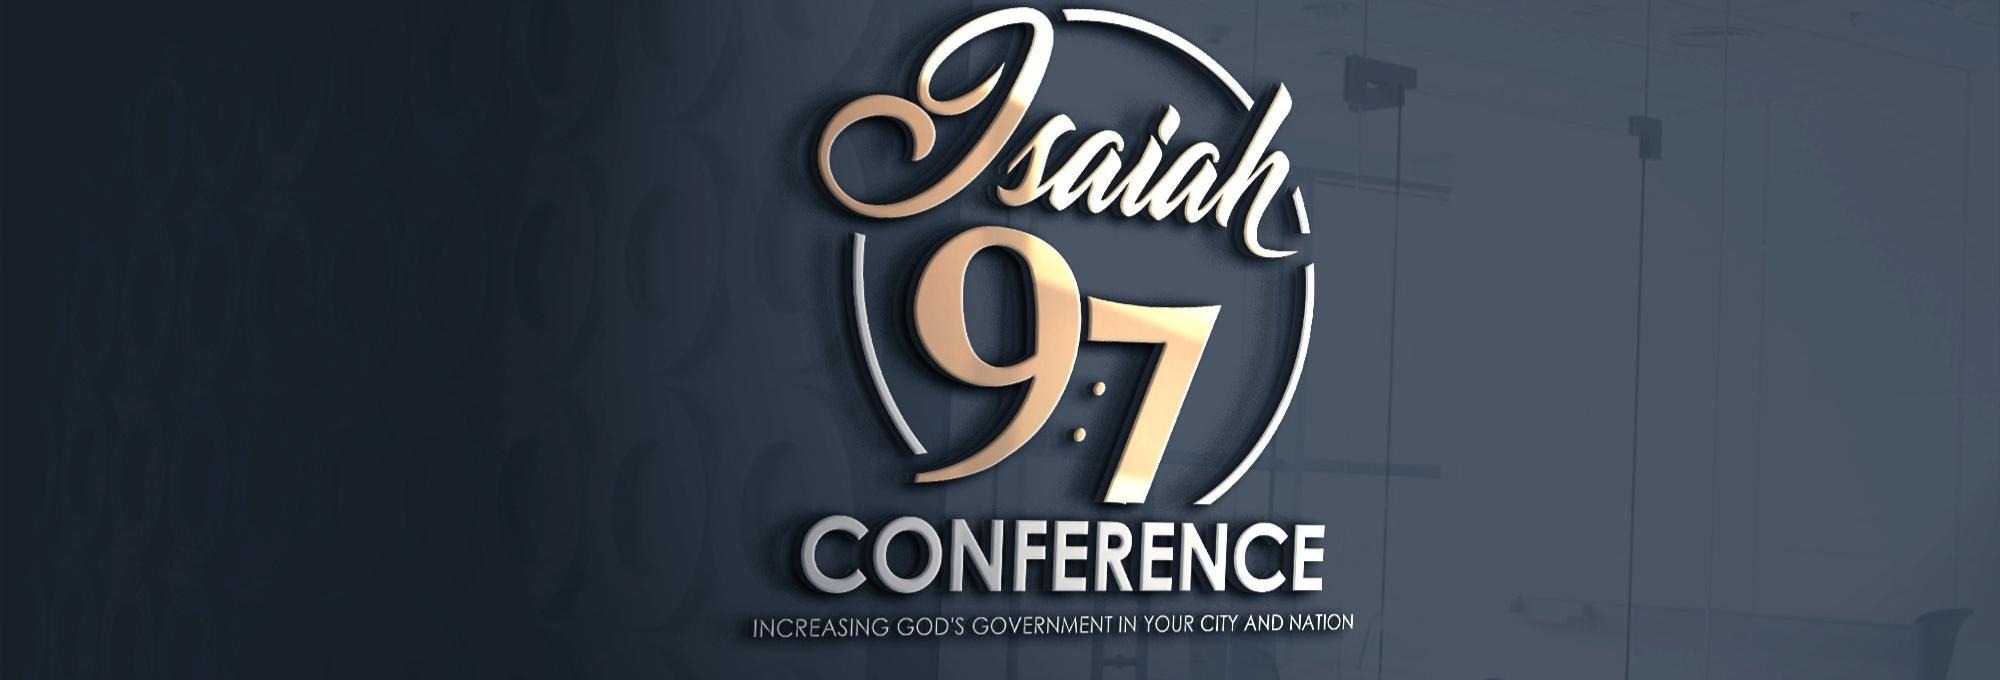 Isaiah 9:7 Conference eCourse